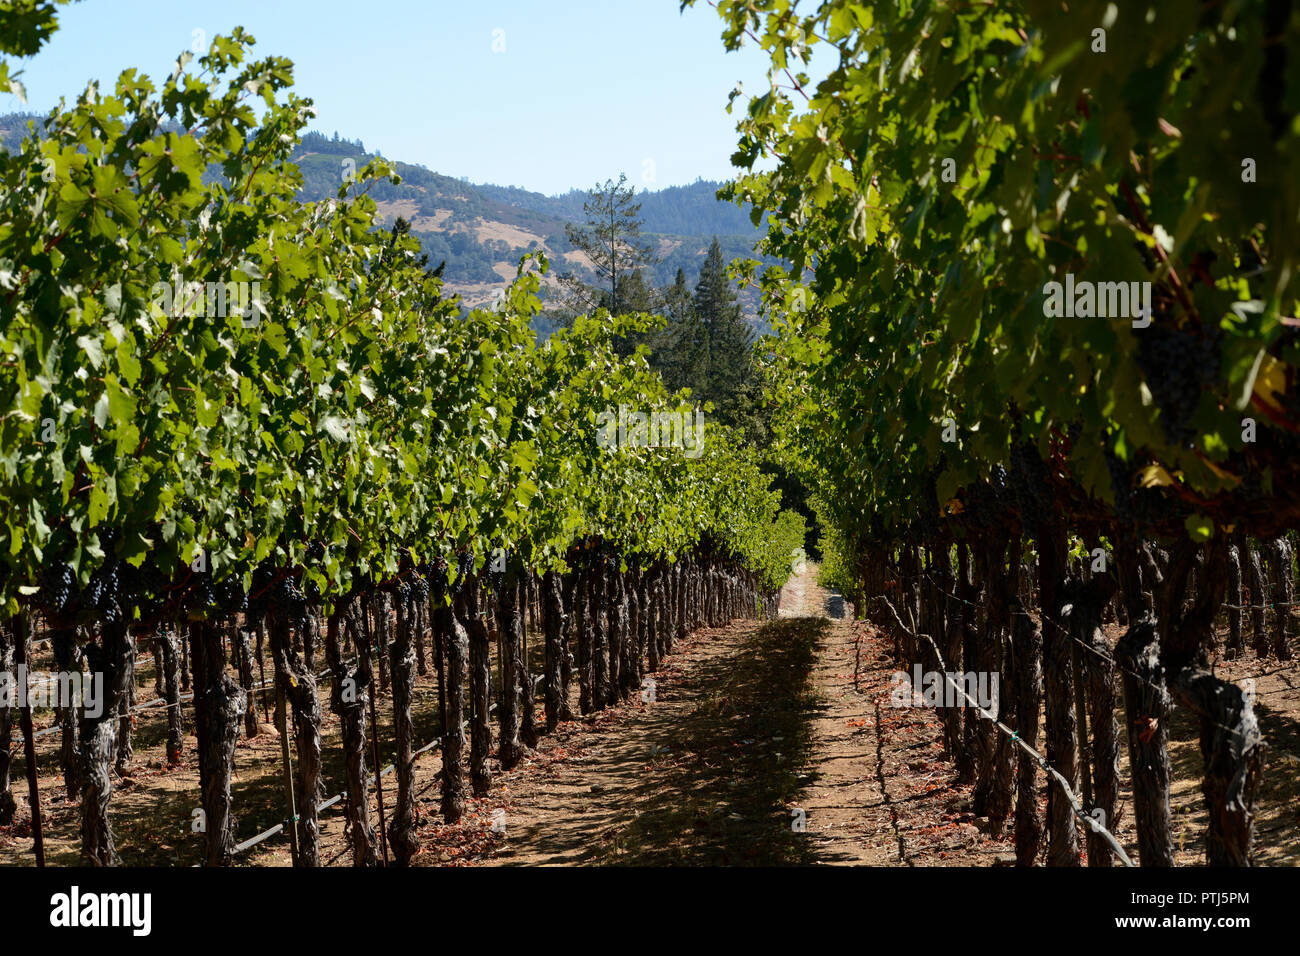 Grapes ready to be harvested at a winery in Napa Valley, California USA Stock Photo